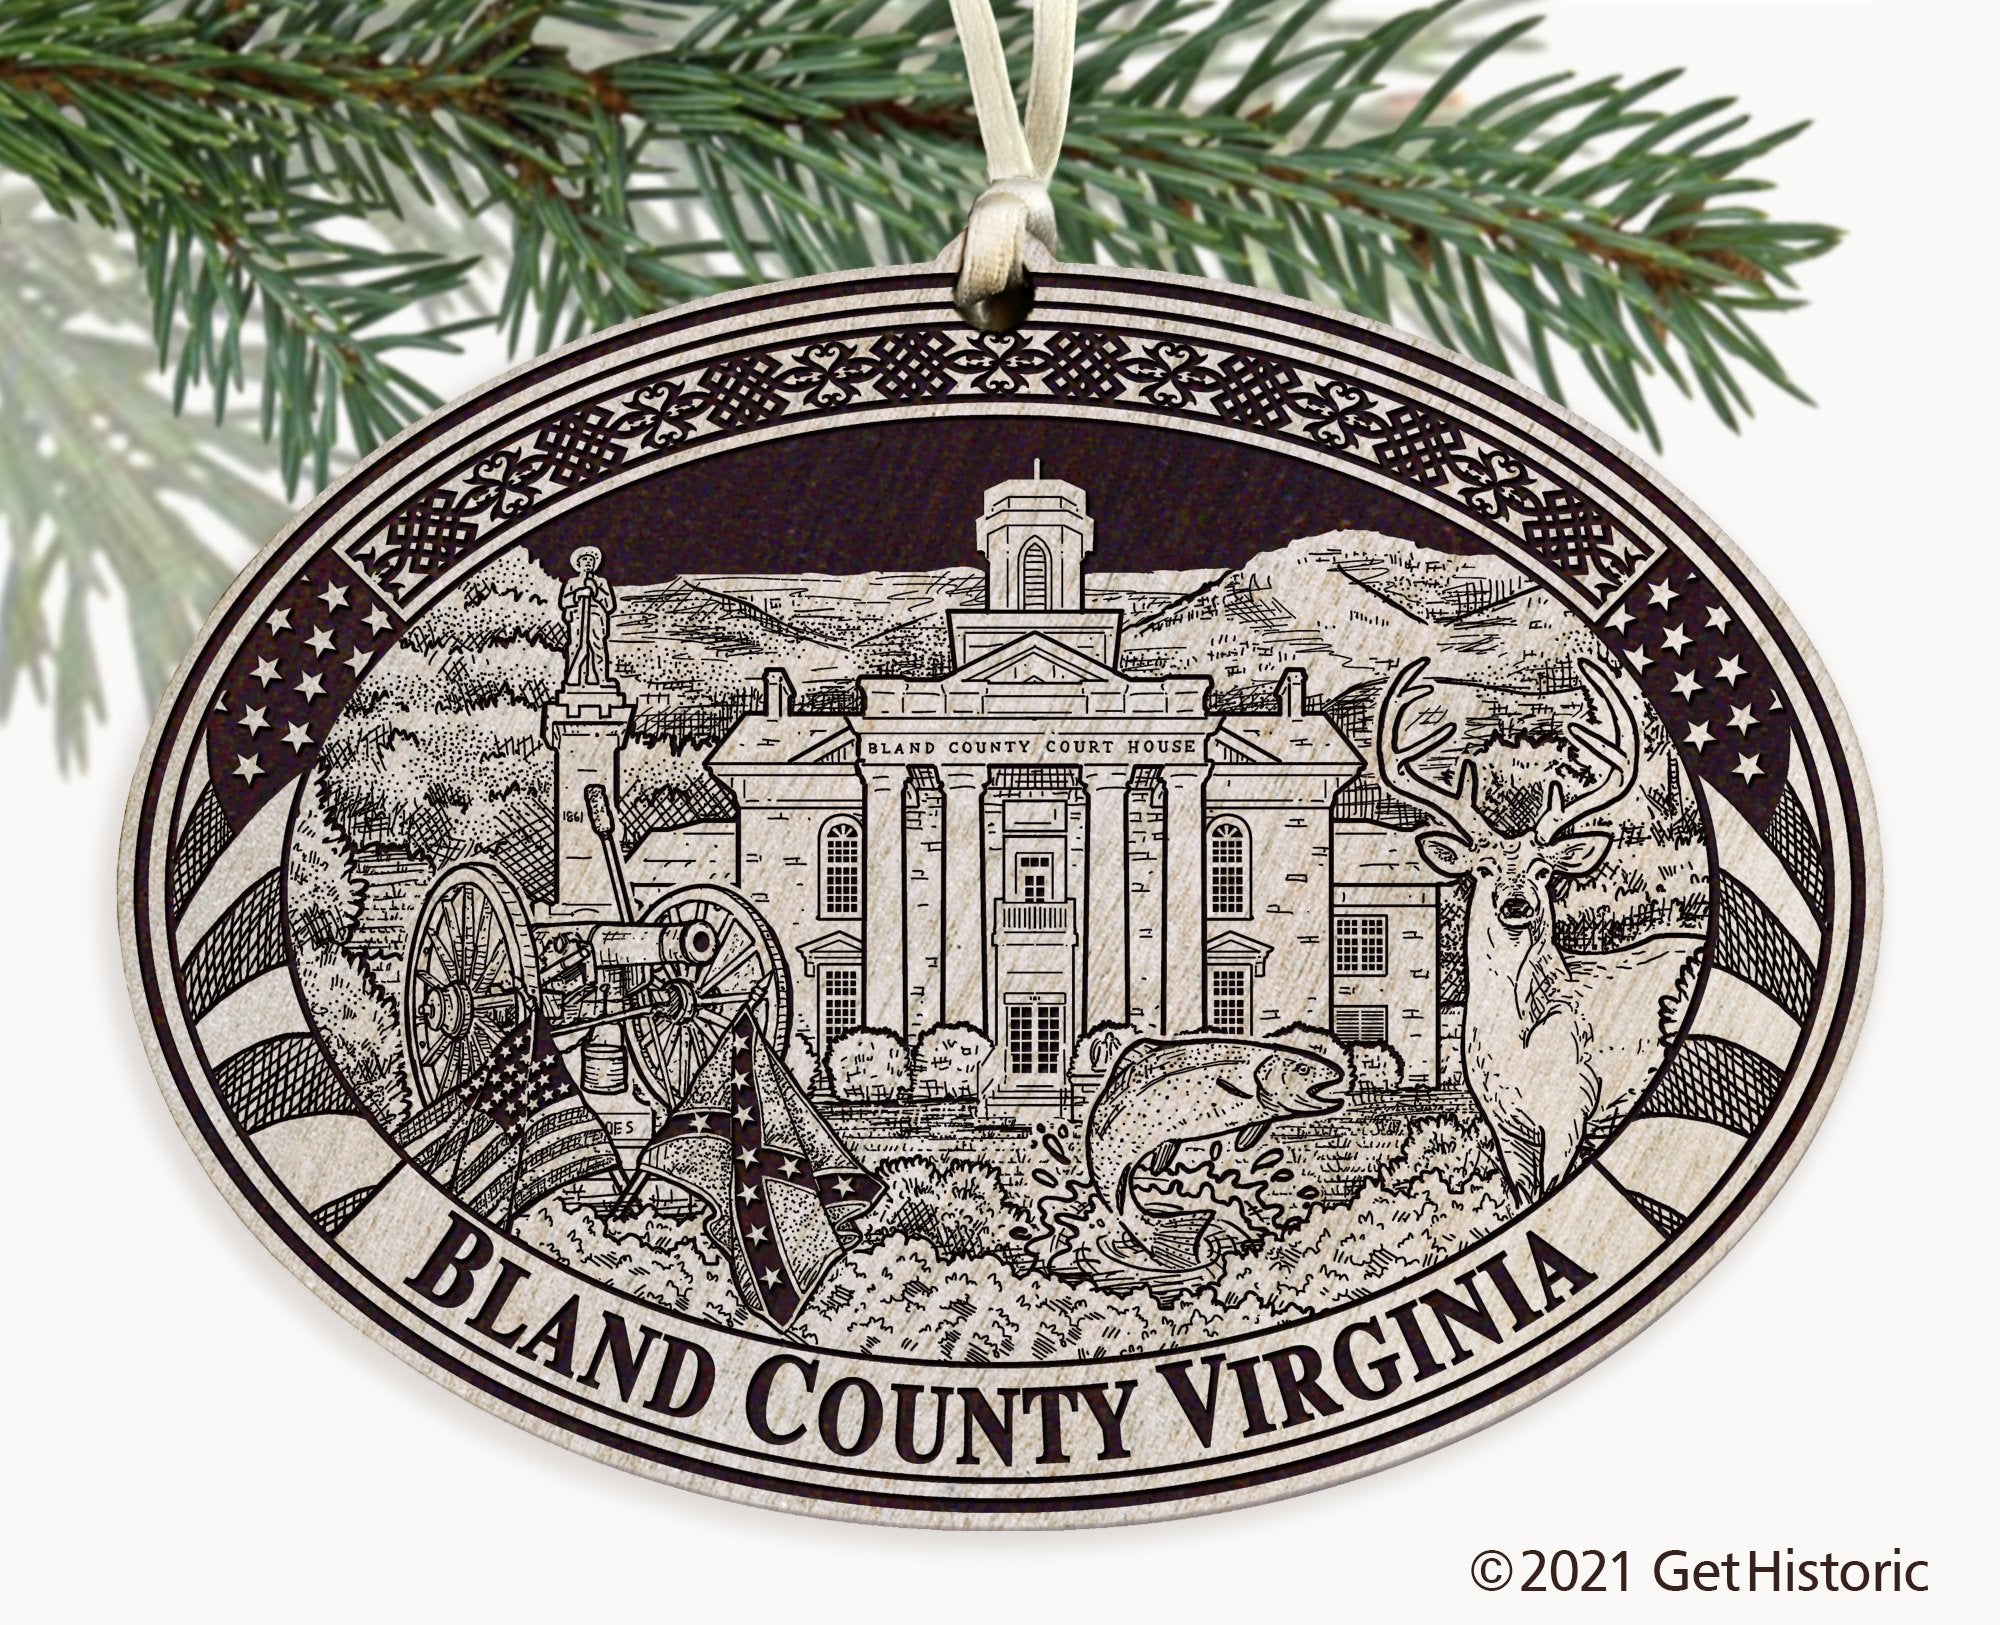 Bland County Virginia Engraved Ornament